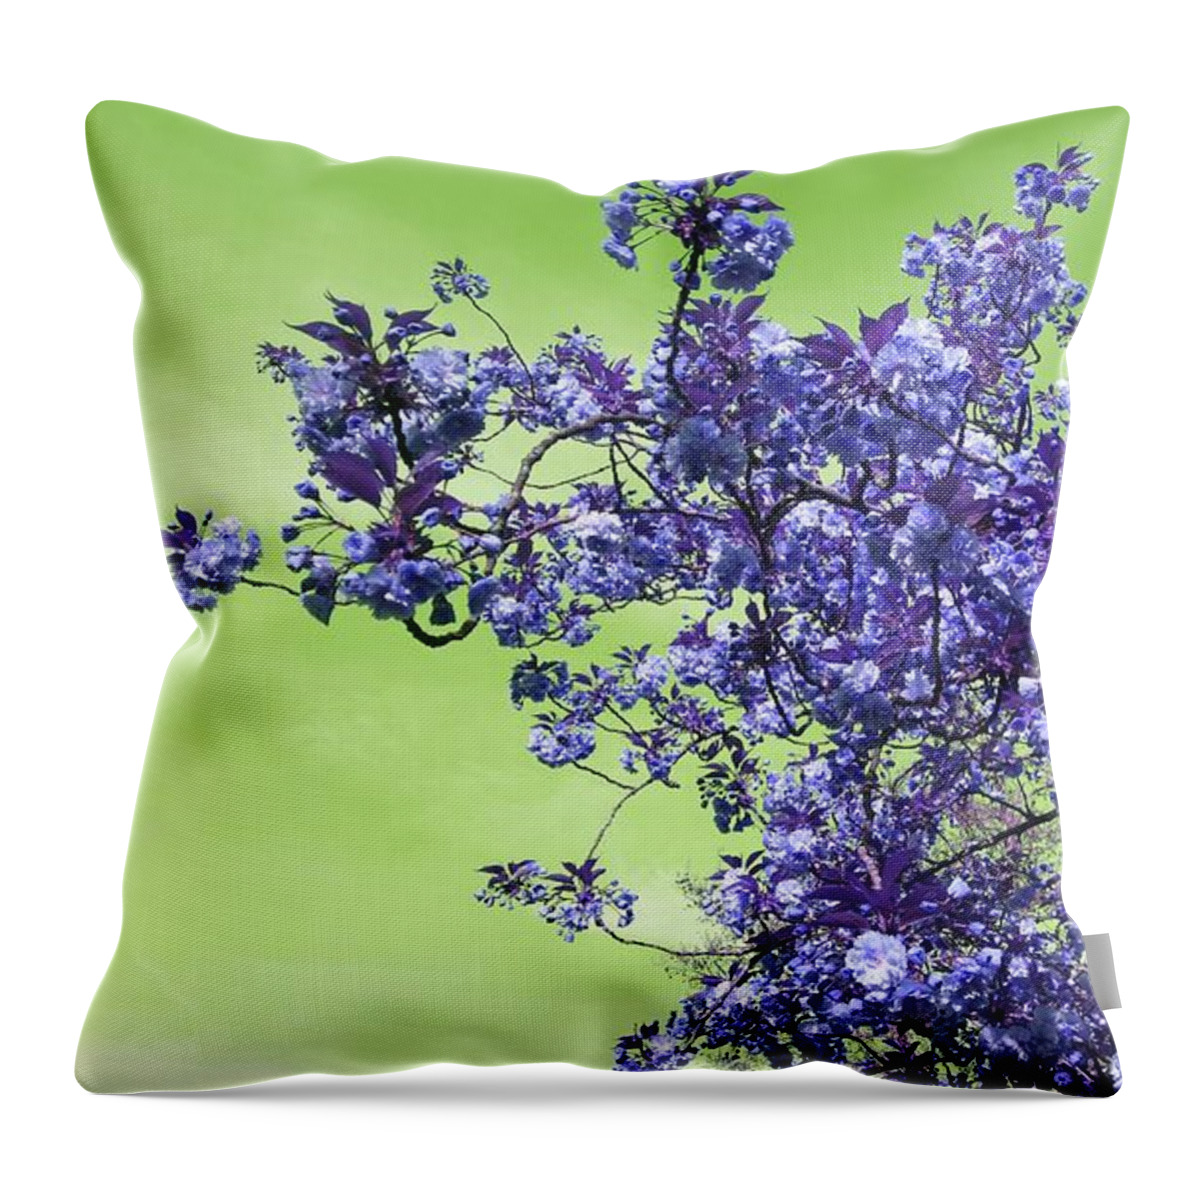 Fantasy Throw Pillow featuring the photograph Blossom O'clock In Twilight Blue by Rowena Tutty